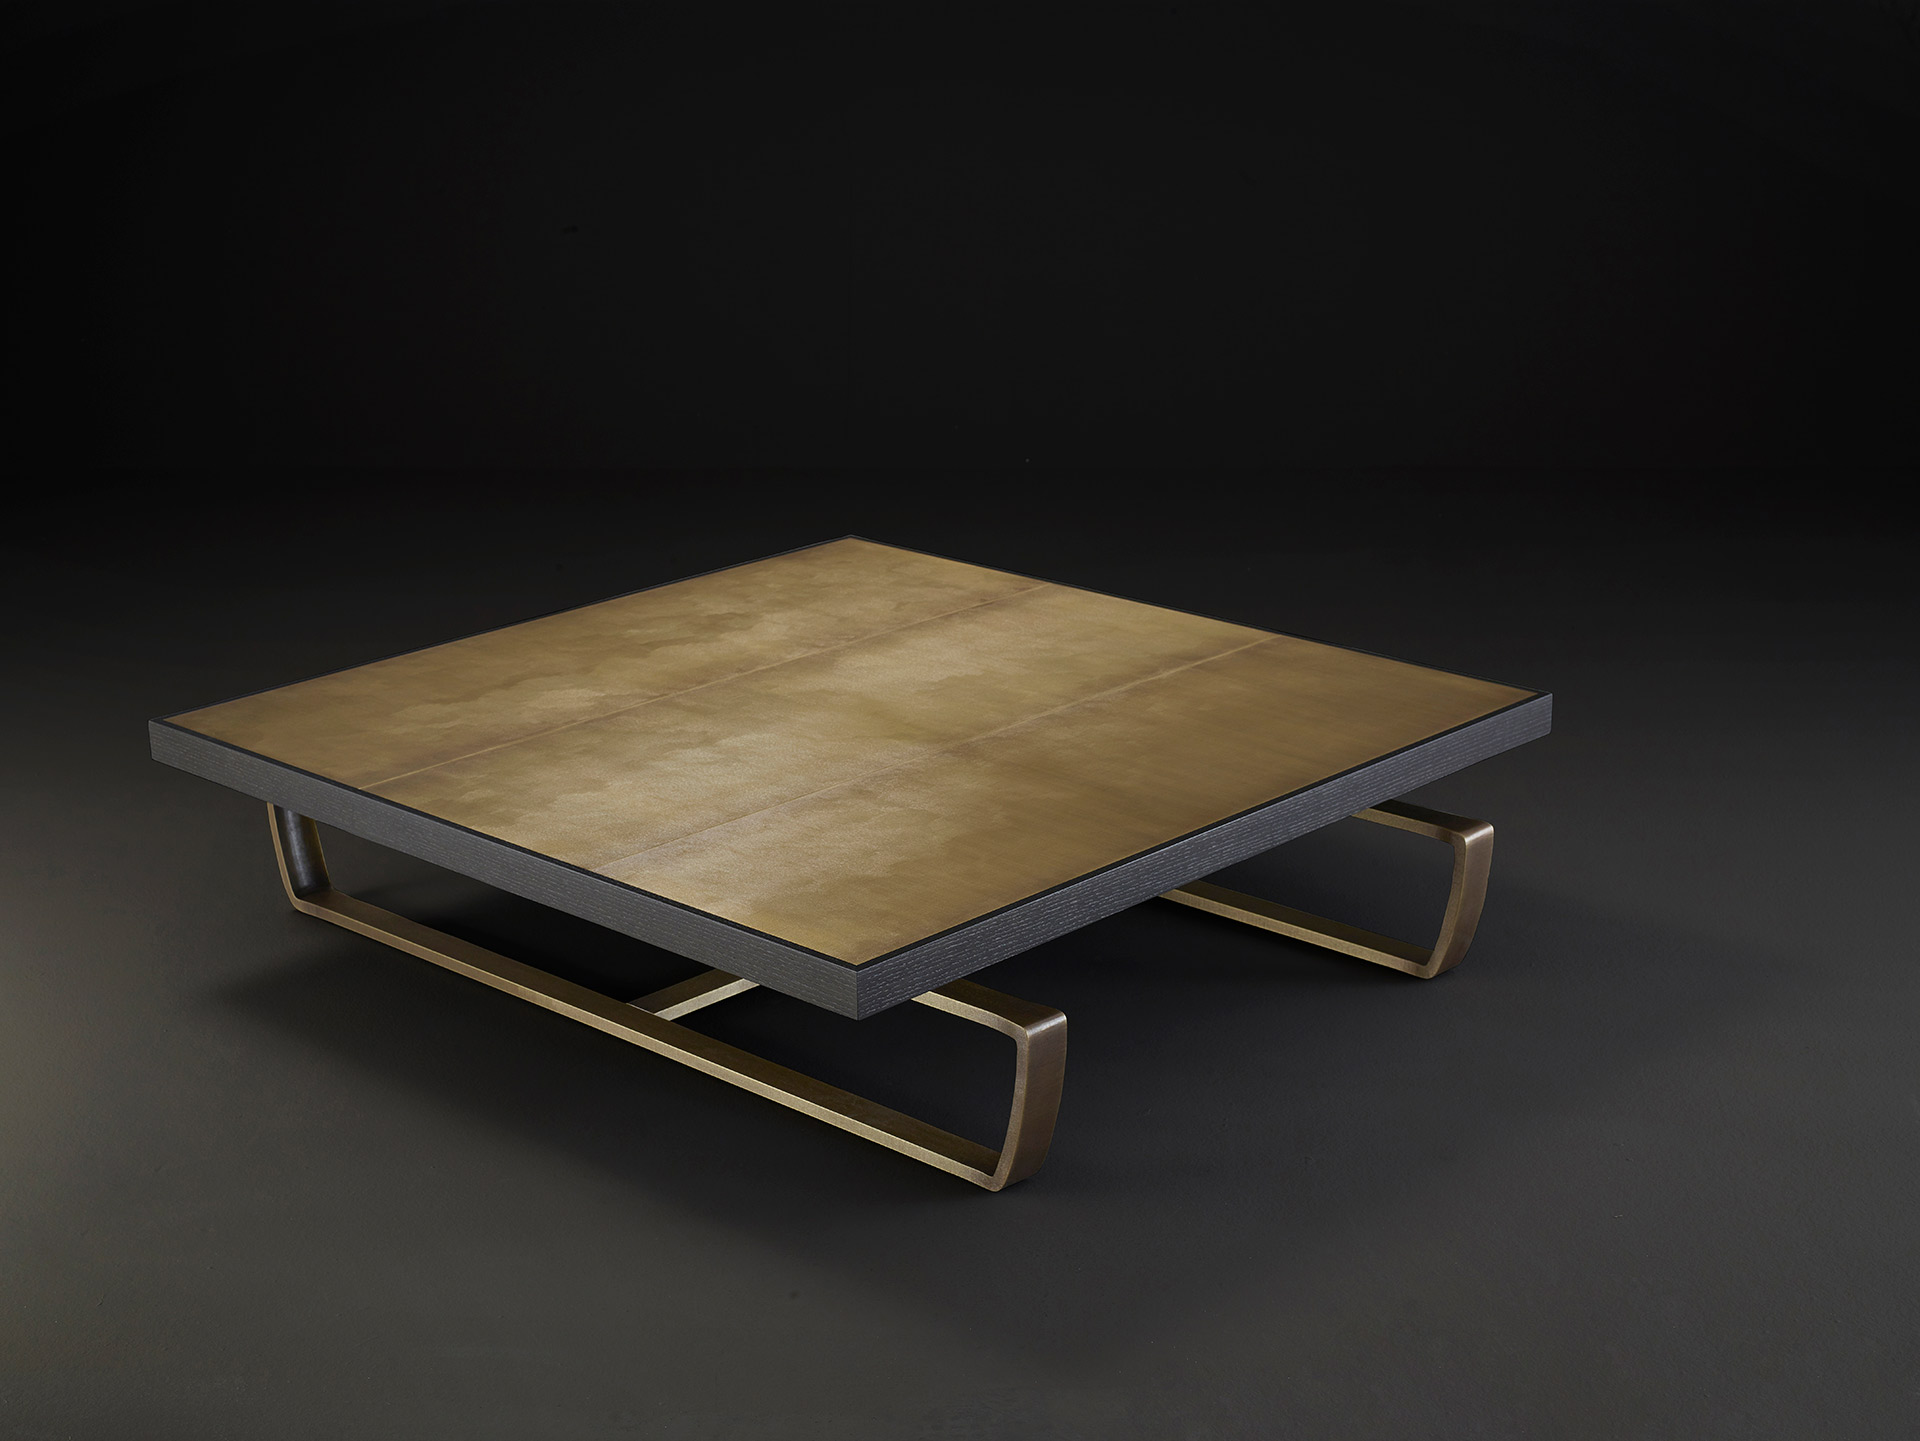 Saint Moritz is a coffee table with wooden top and bronze base, from Promemoria's catalogue | Promemoria